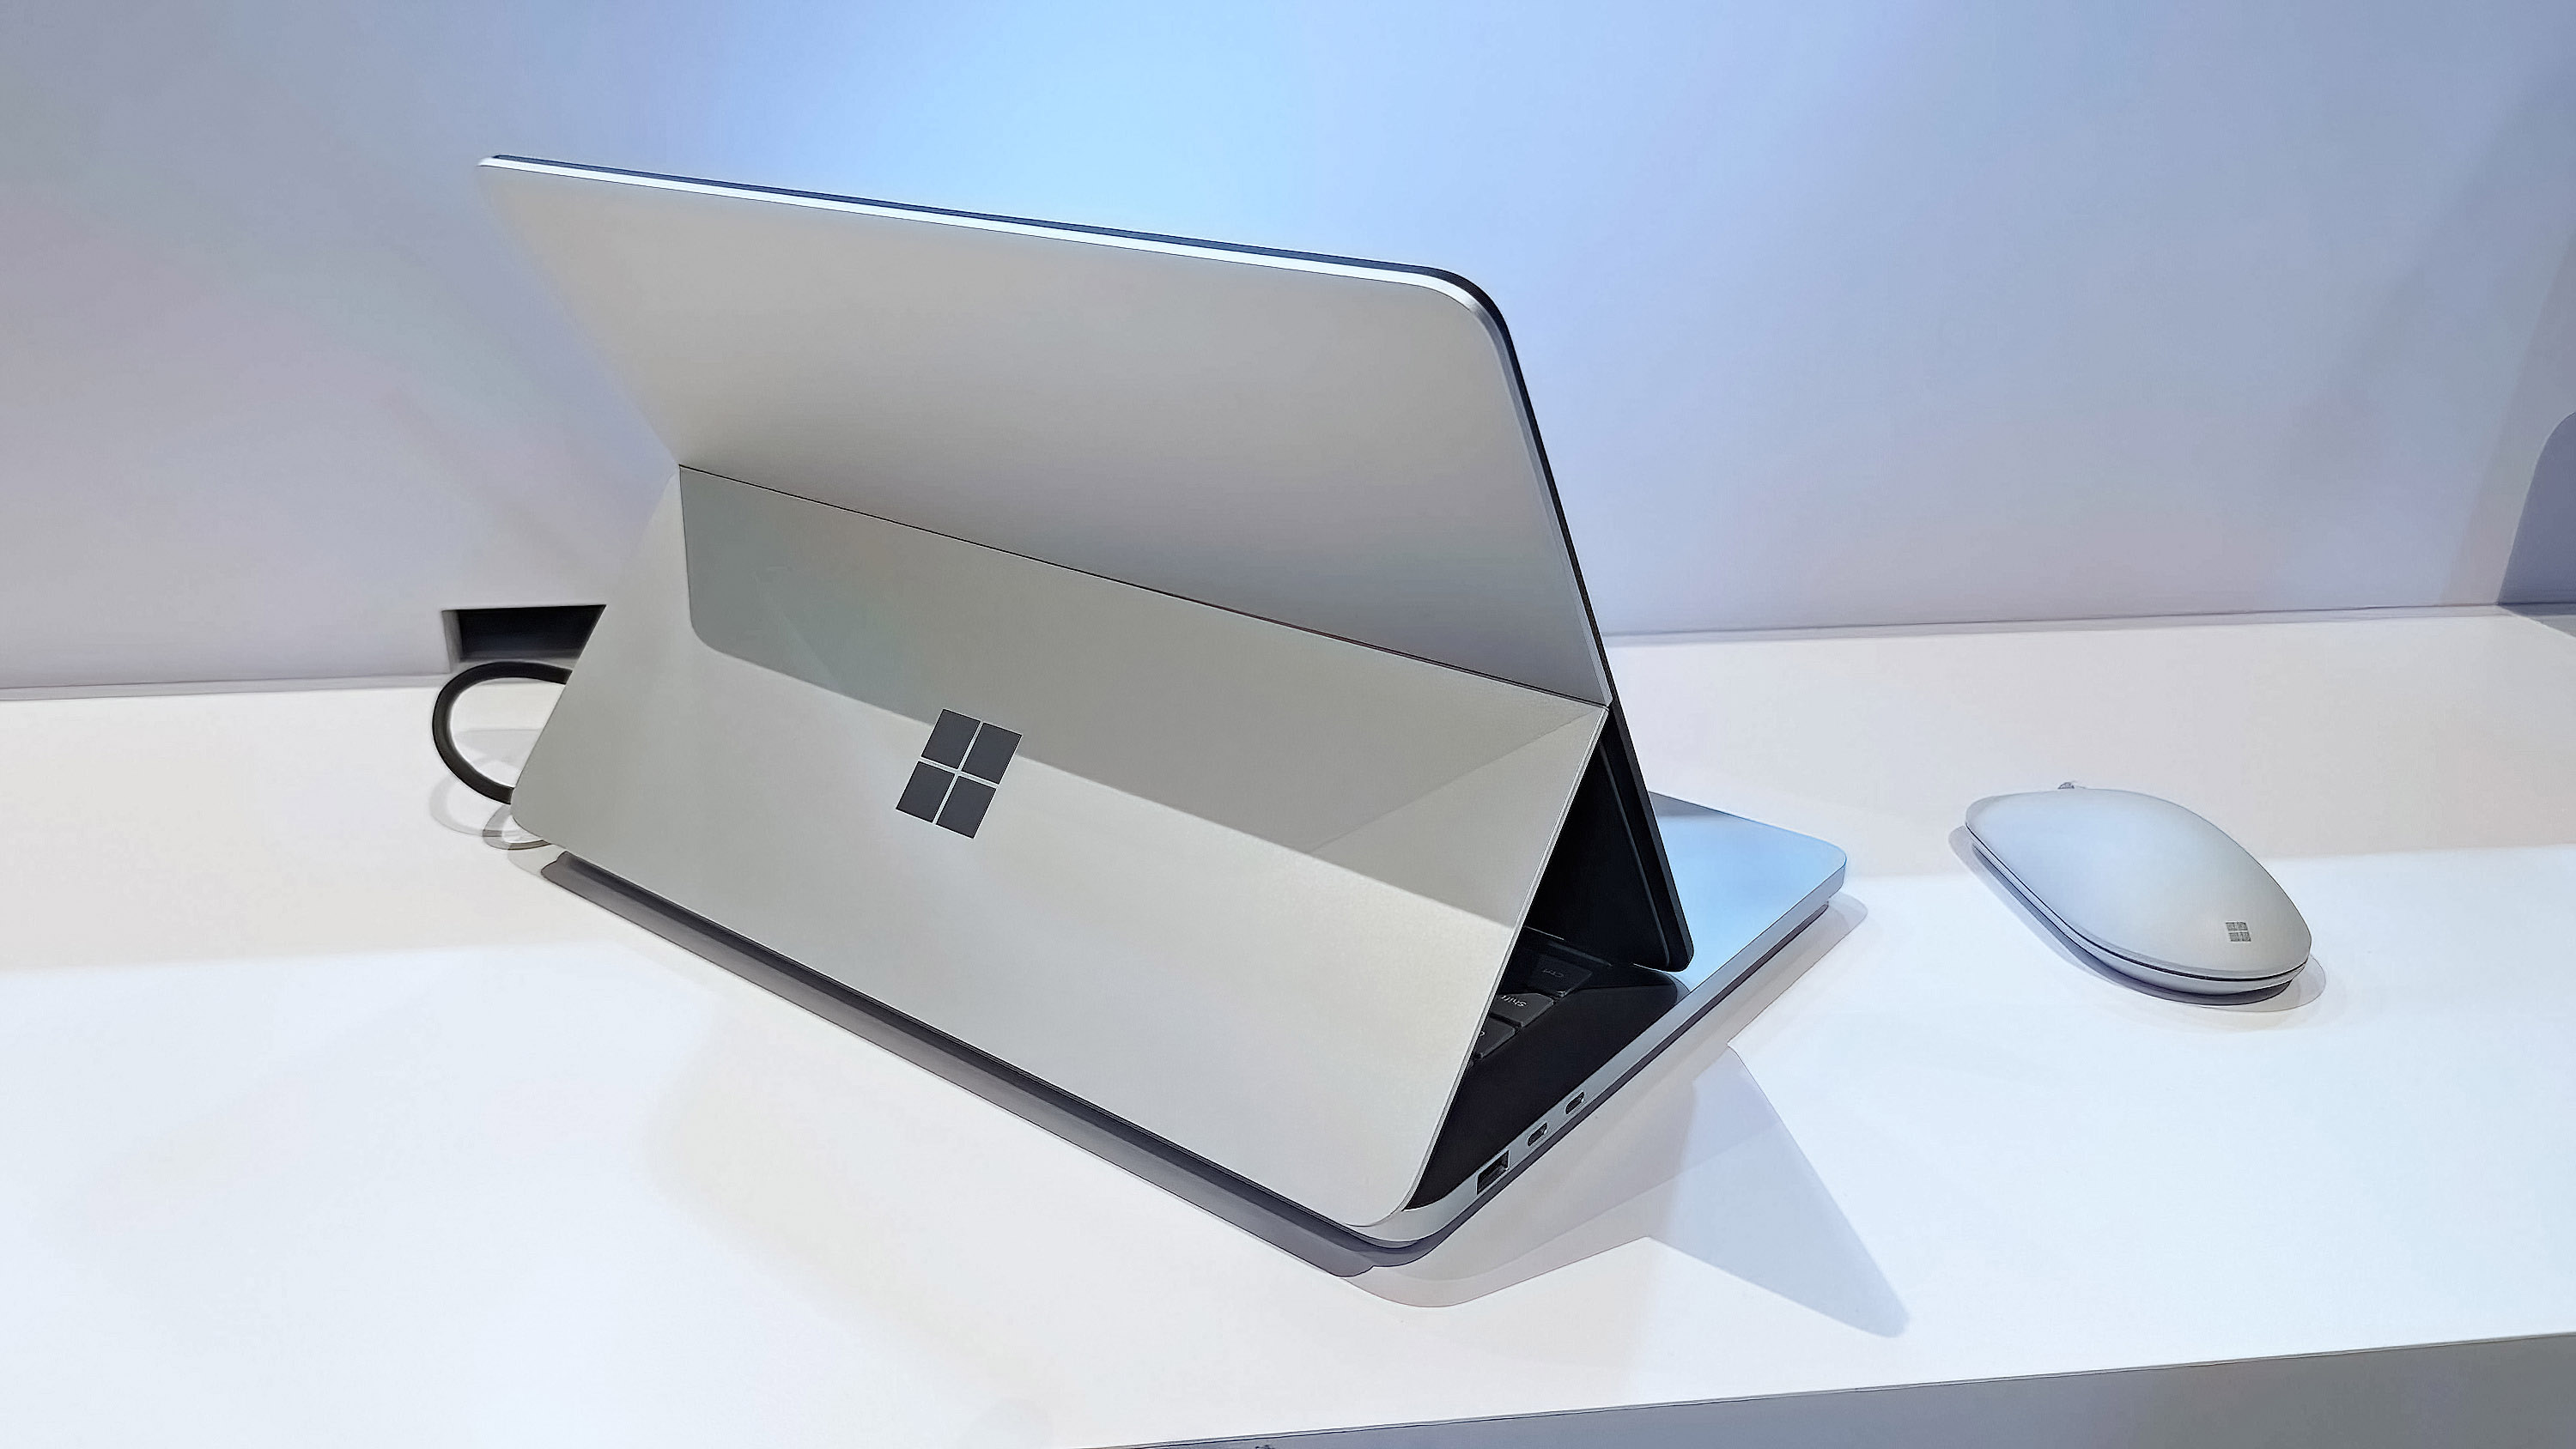 If this is the future of Surface, I see why Panos Panay left Microsoft